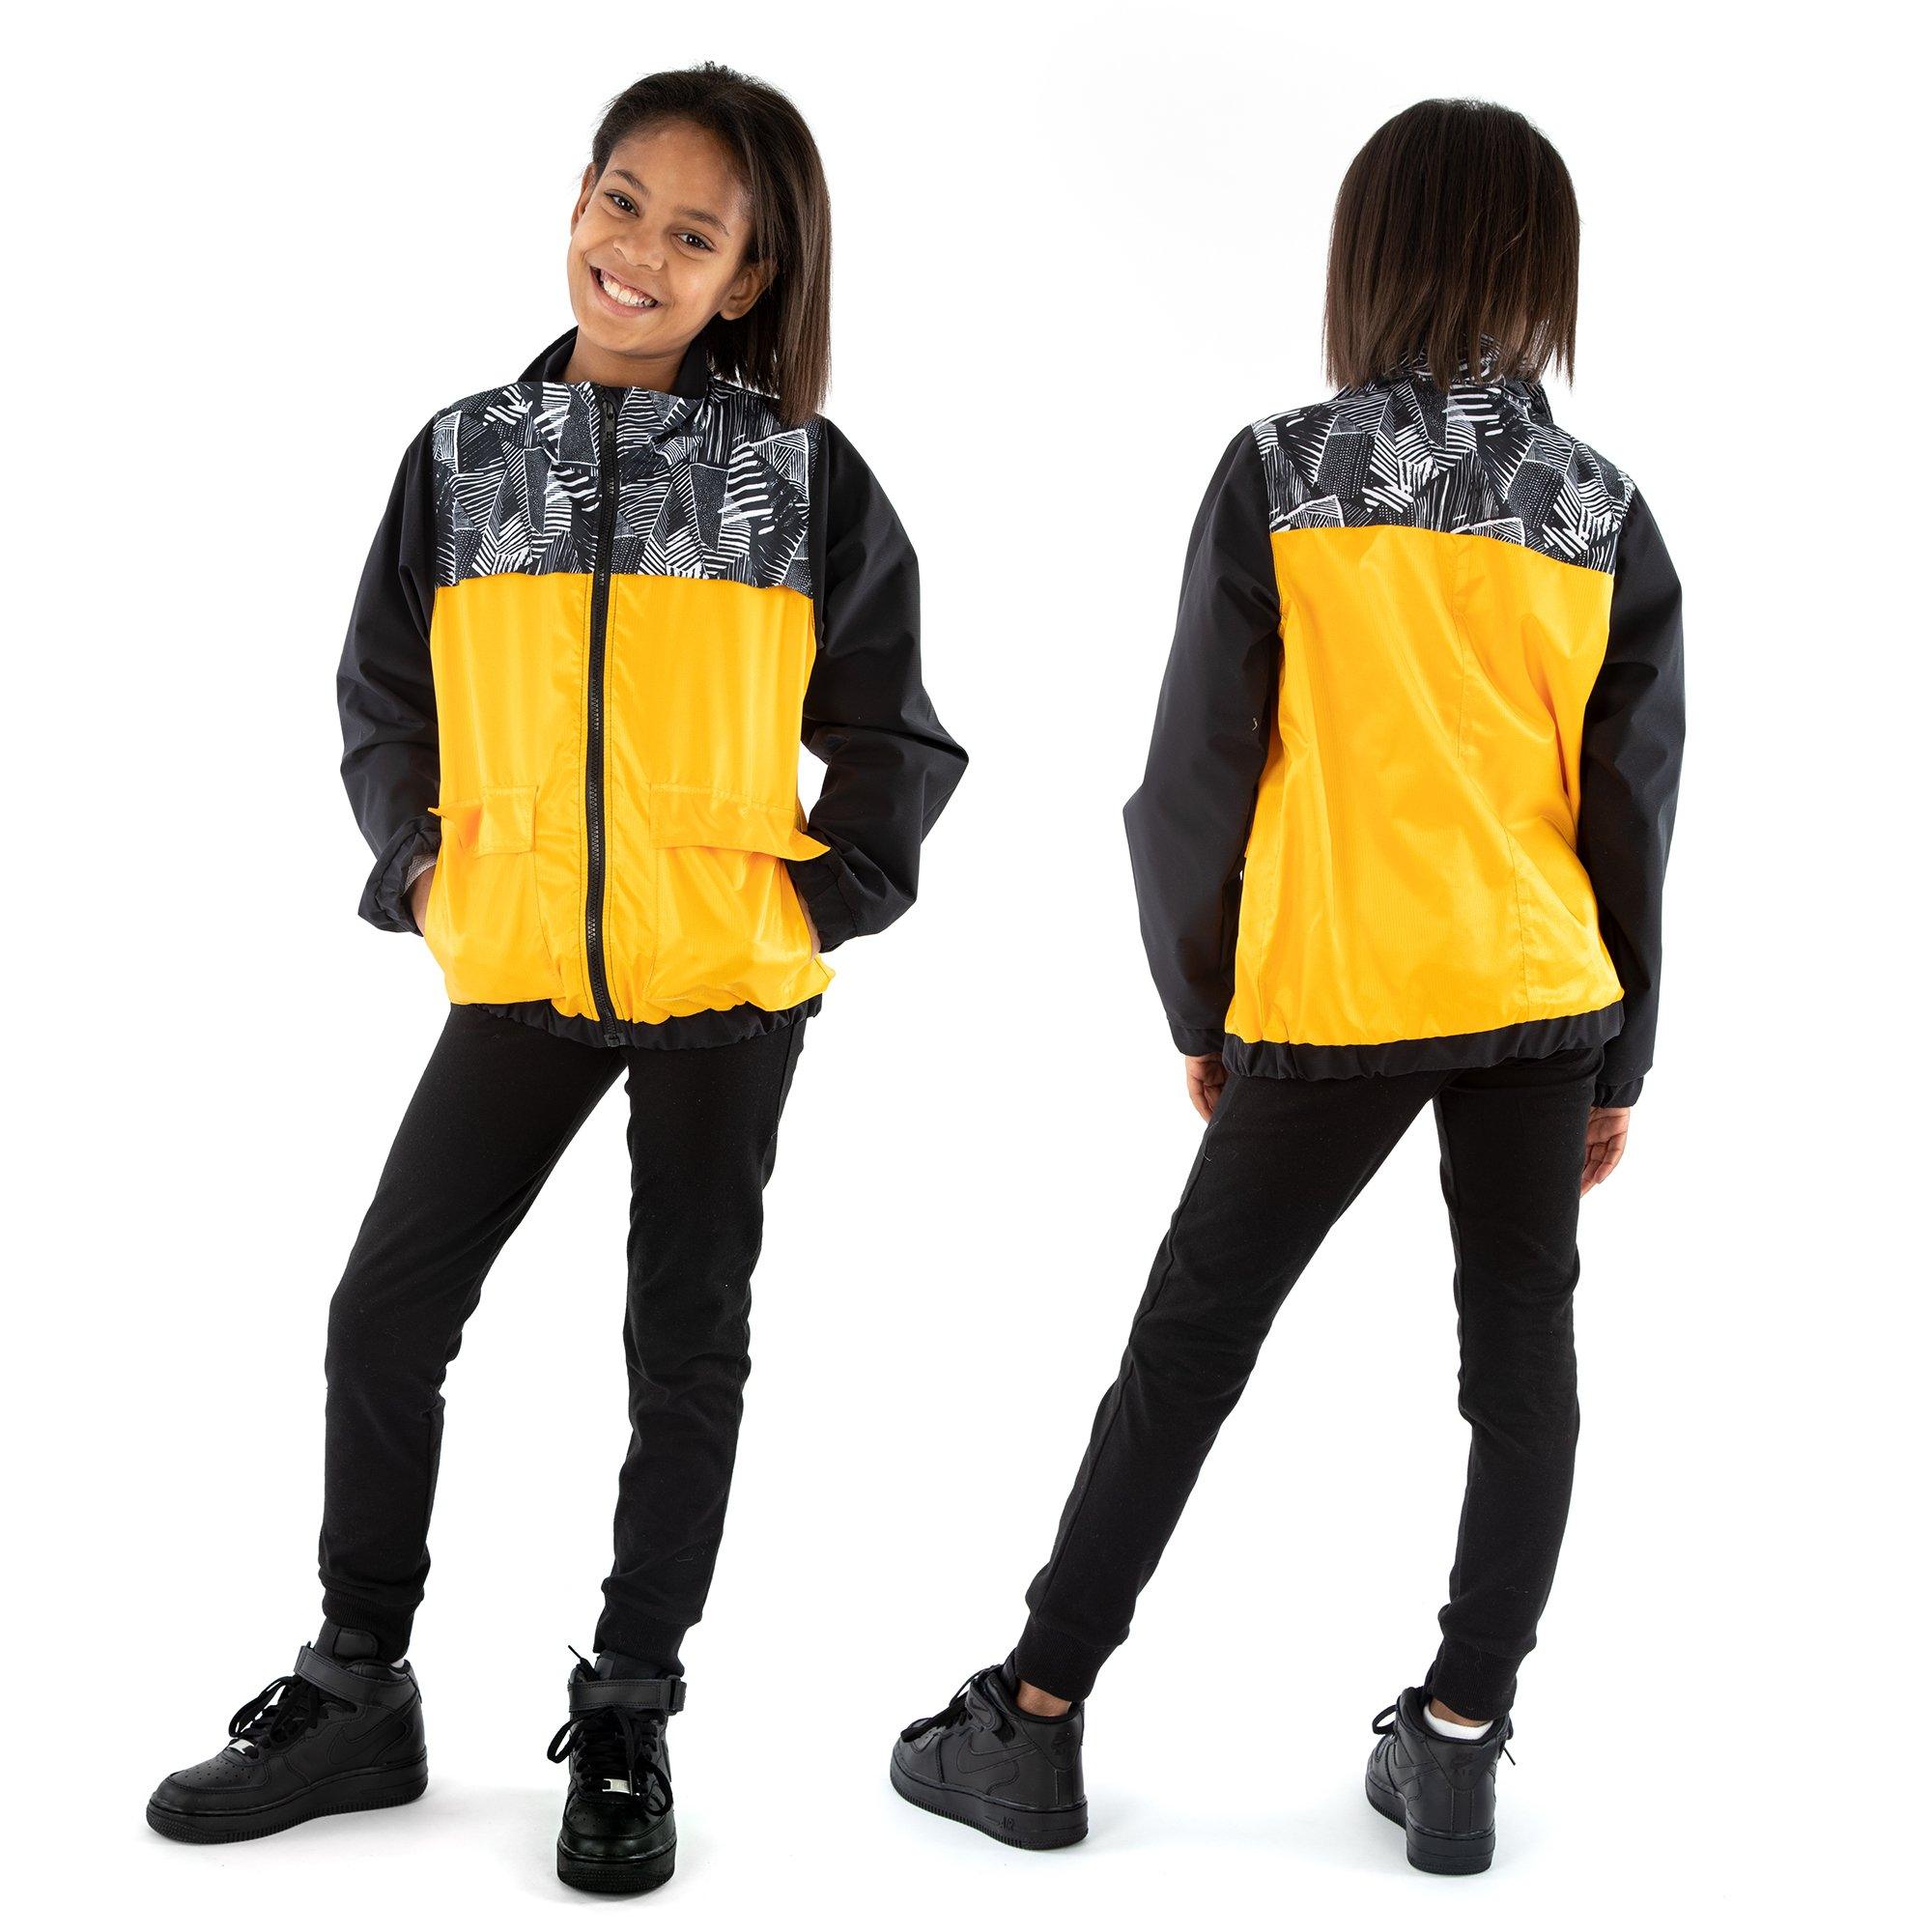 JALIE 4012 - MAXIME - Jacket for Girls and Women